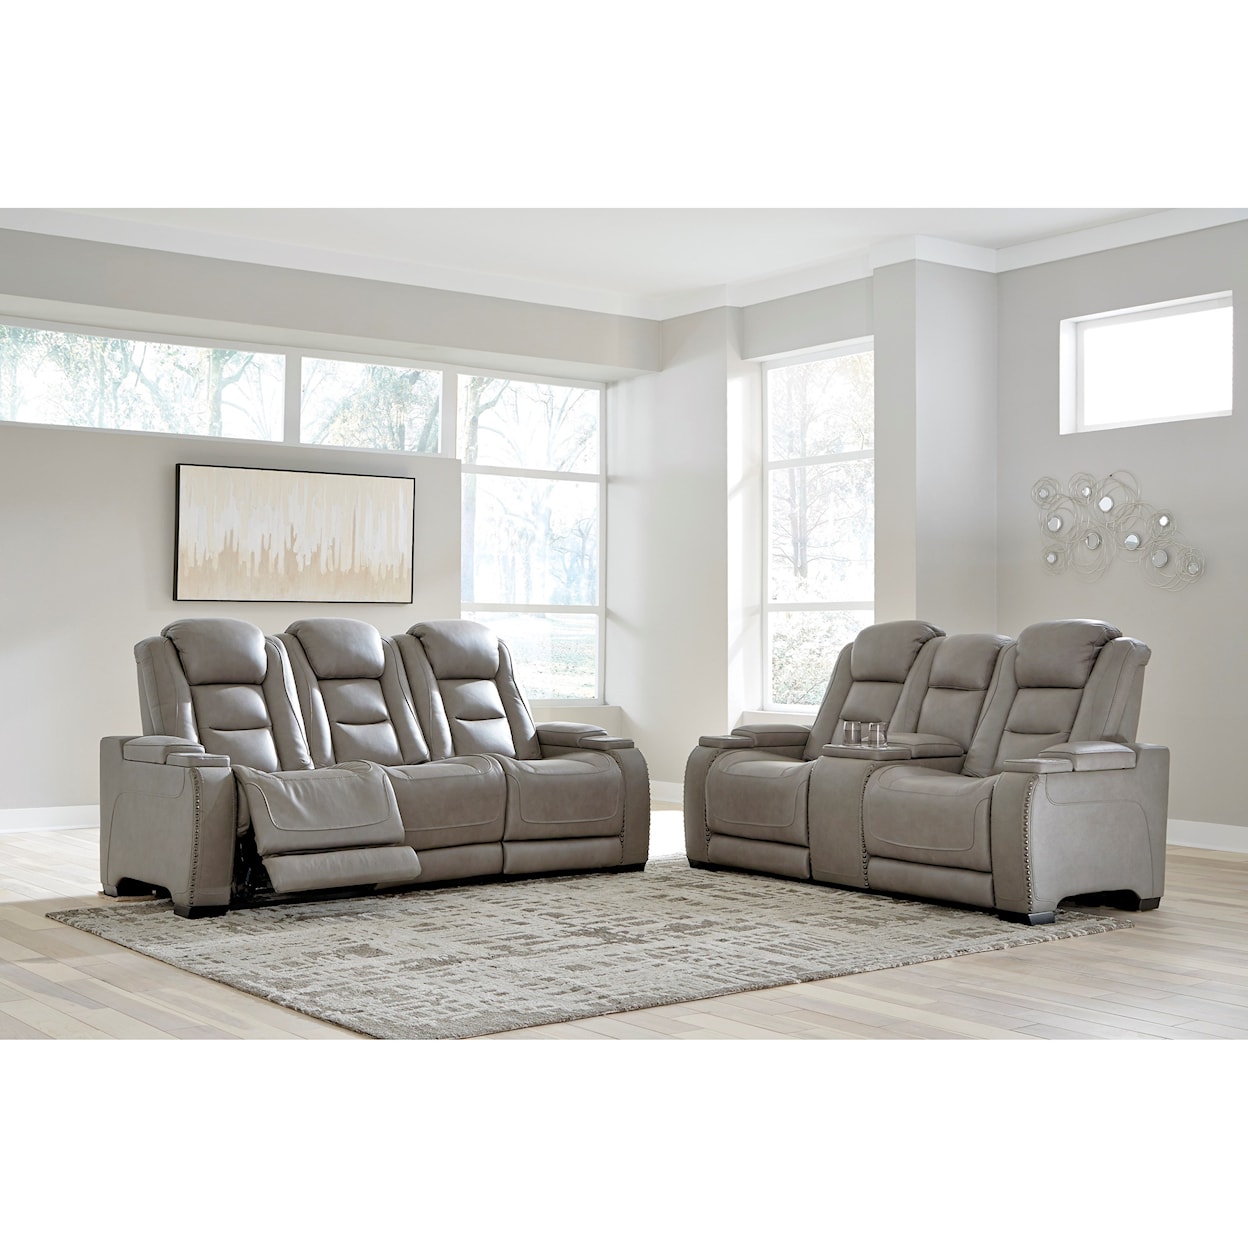 Signature Design by Ashley The Man-Den Reclining Living Room Group